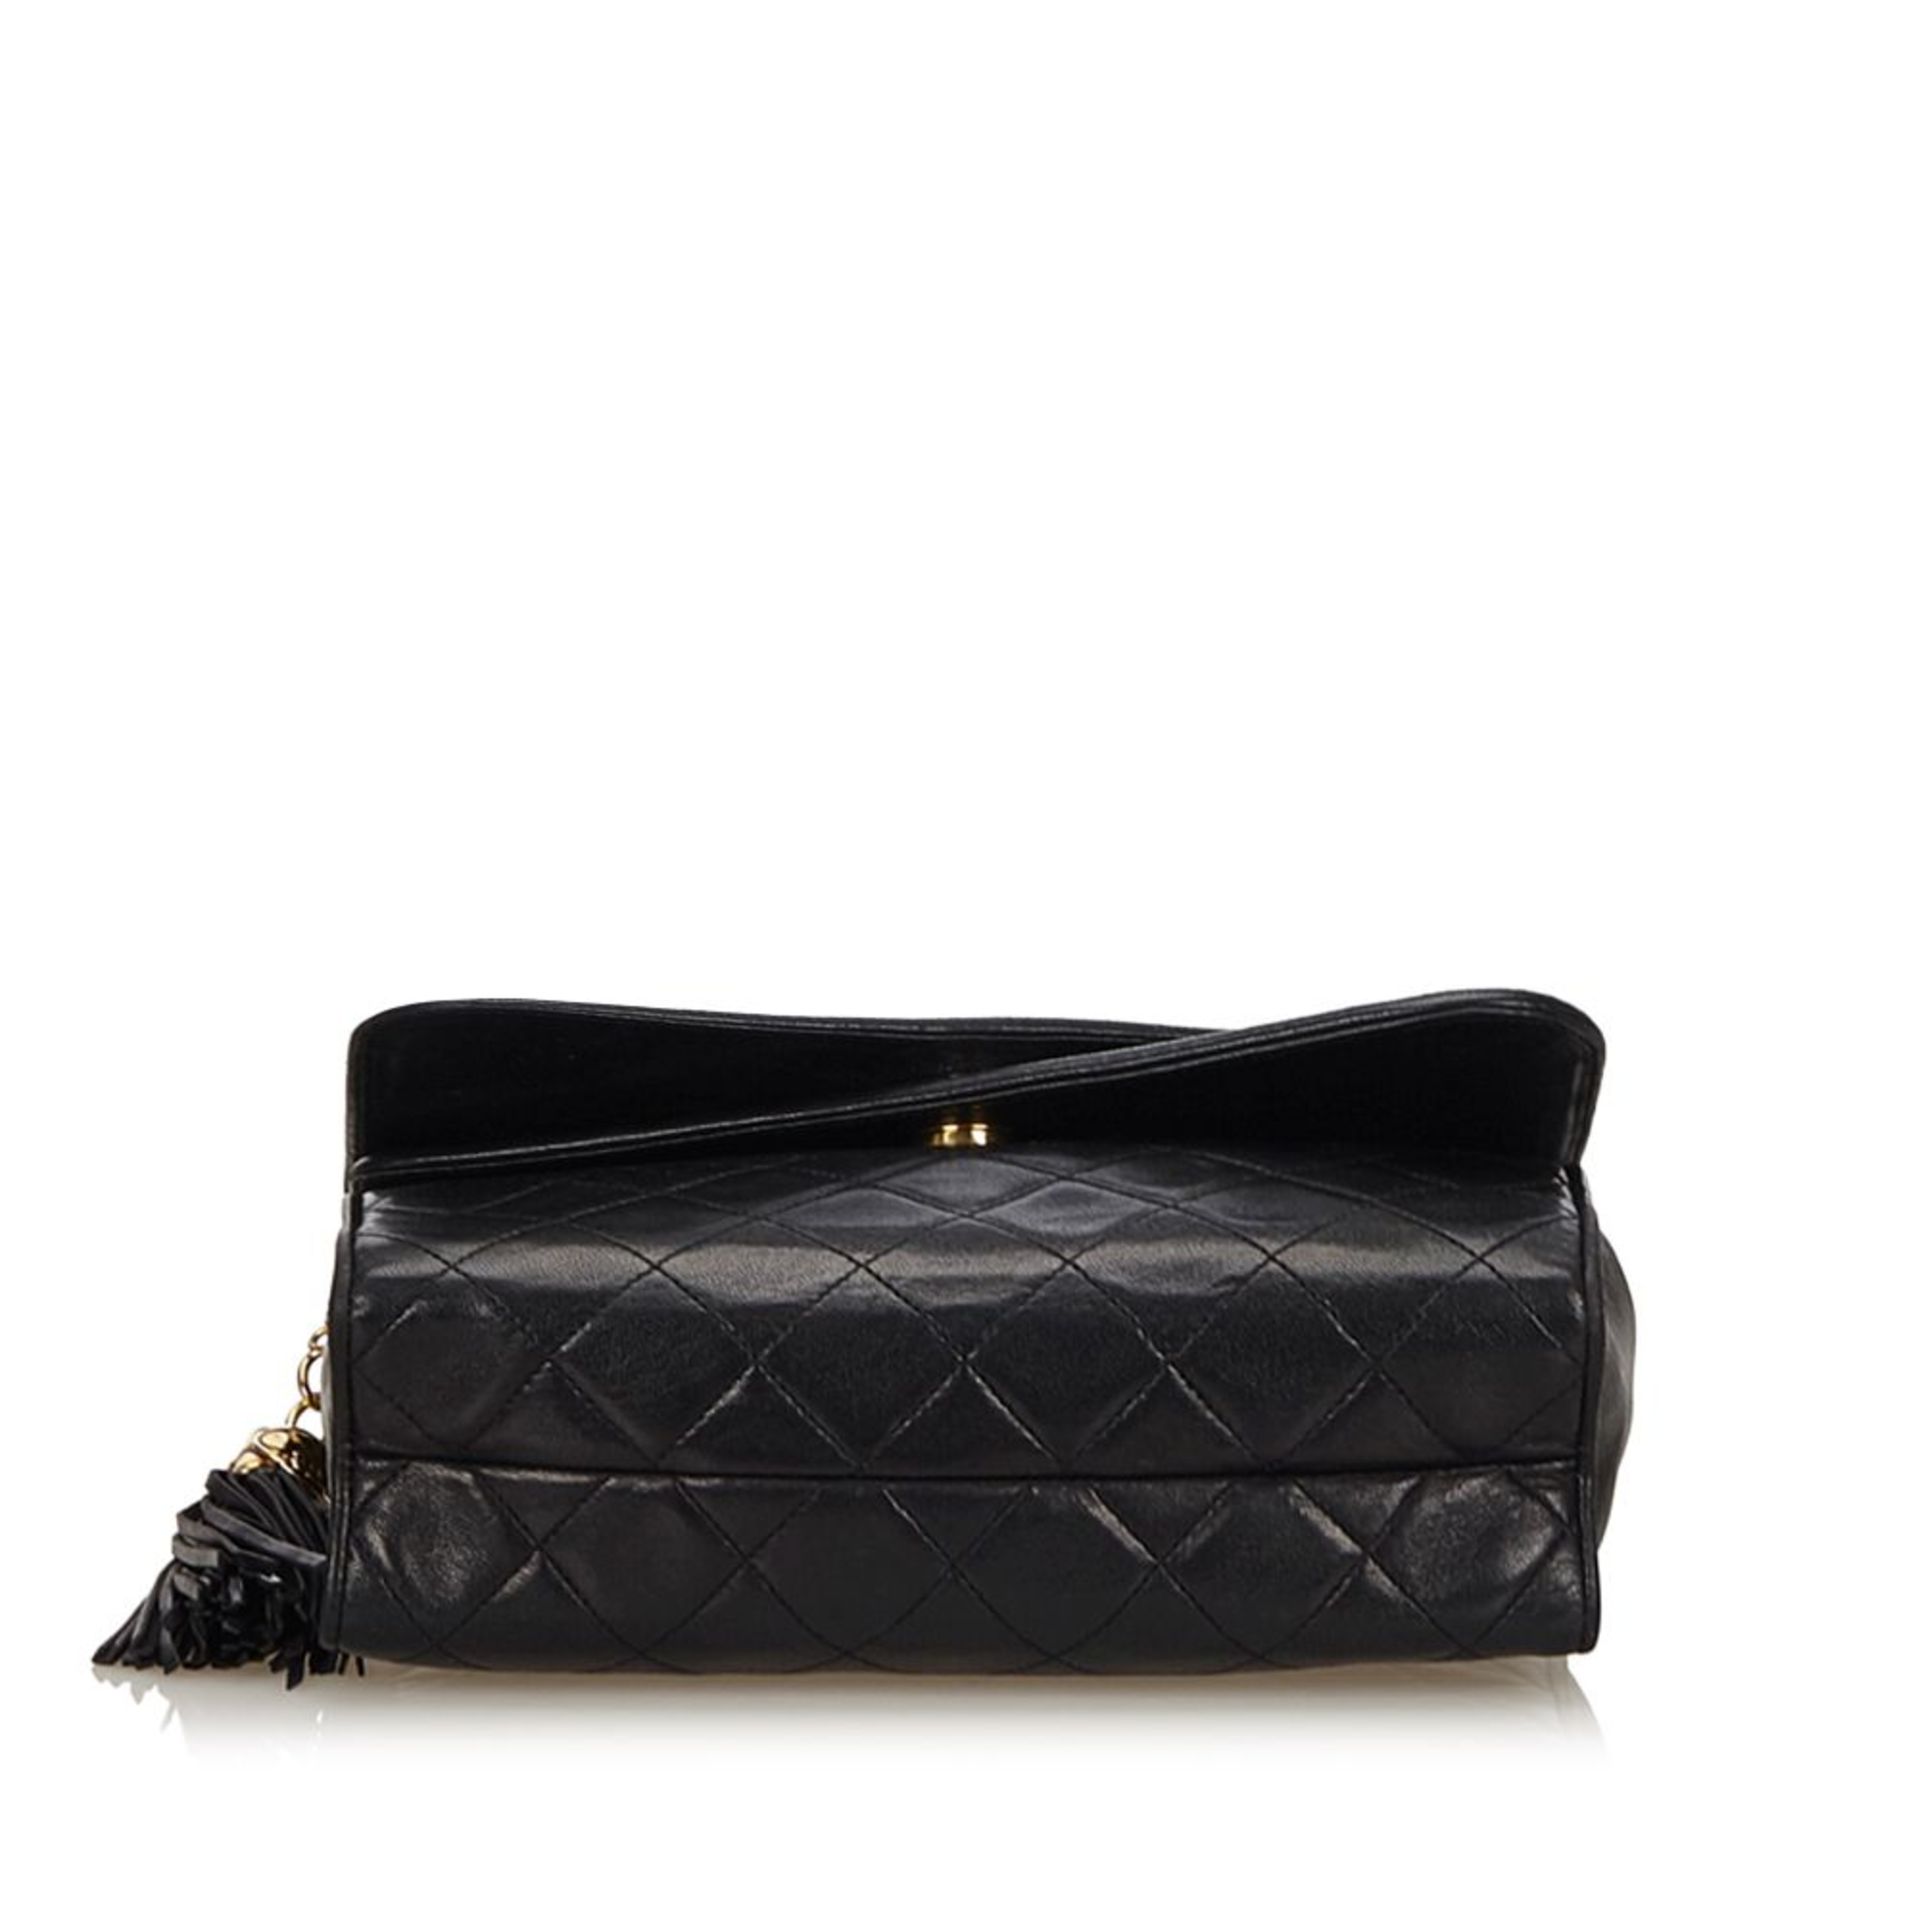 A Chanel matelassé tassel double flap shoulder bag,featuring a lambskin leather body, gold-tone - Image 4 of 5